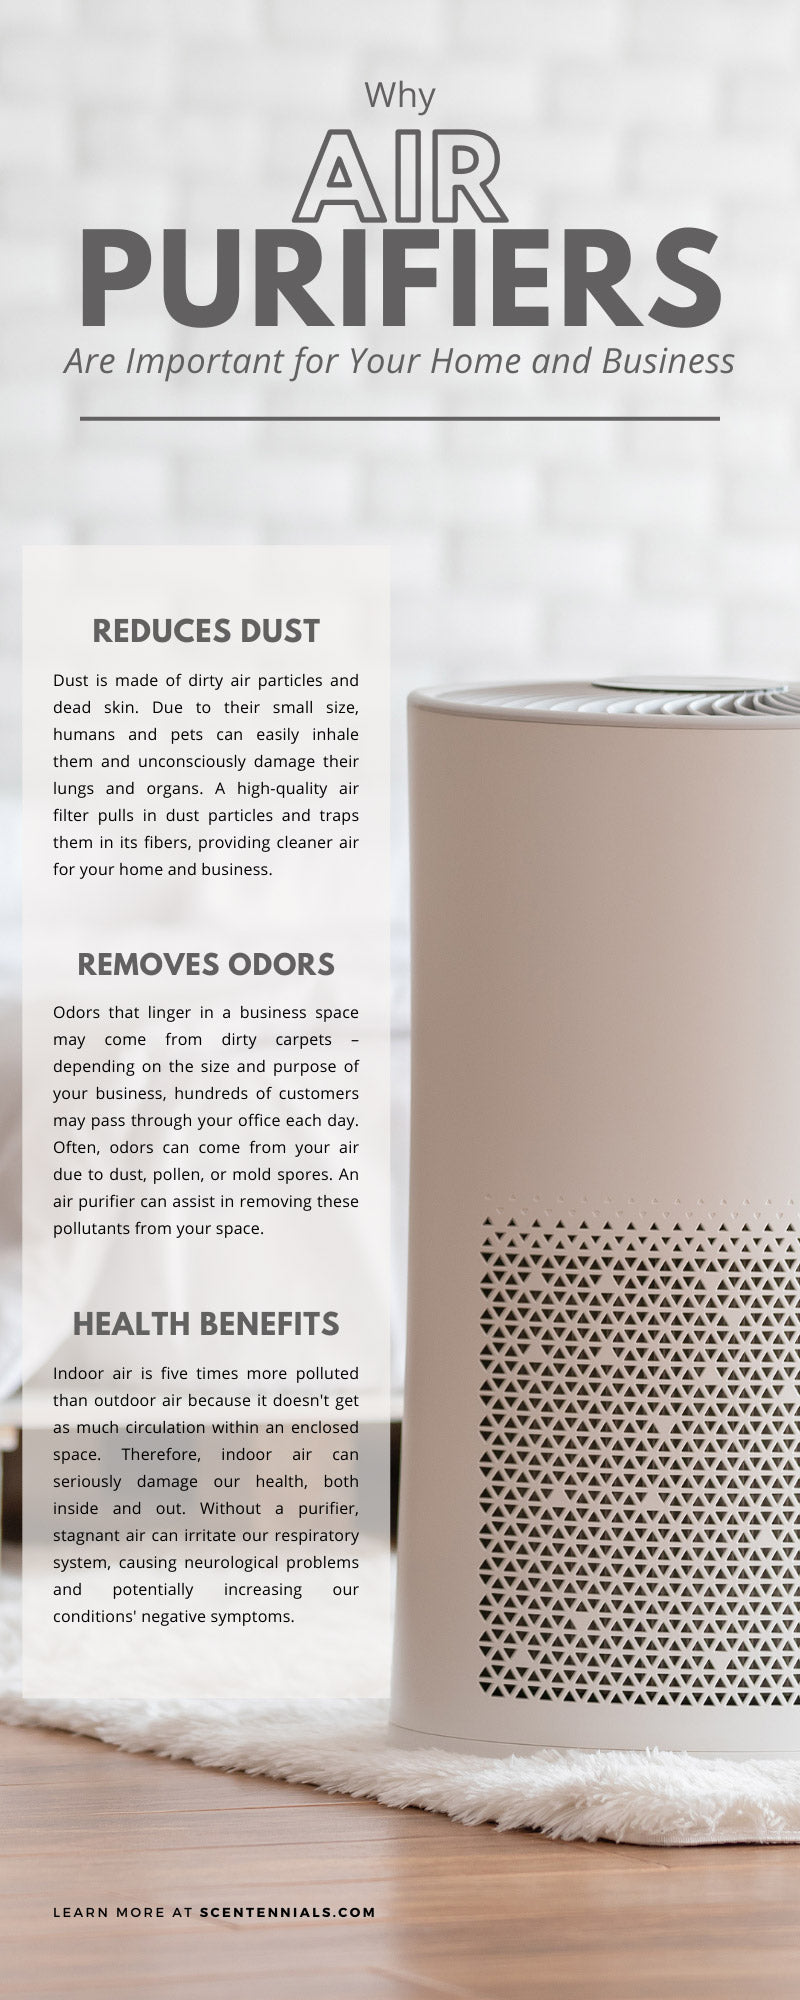 Why Air Purifiers Are Important for Your Home and Business